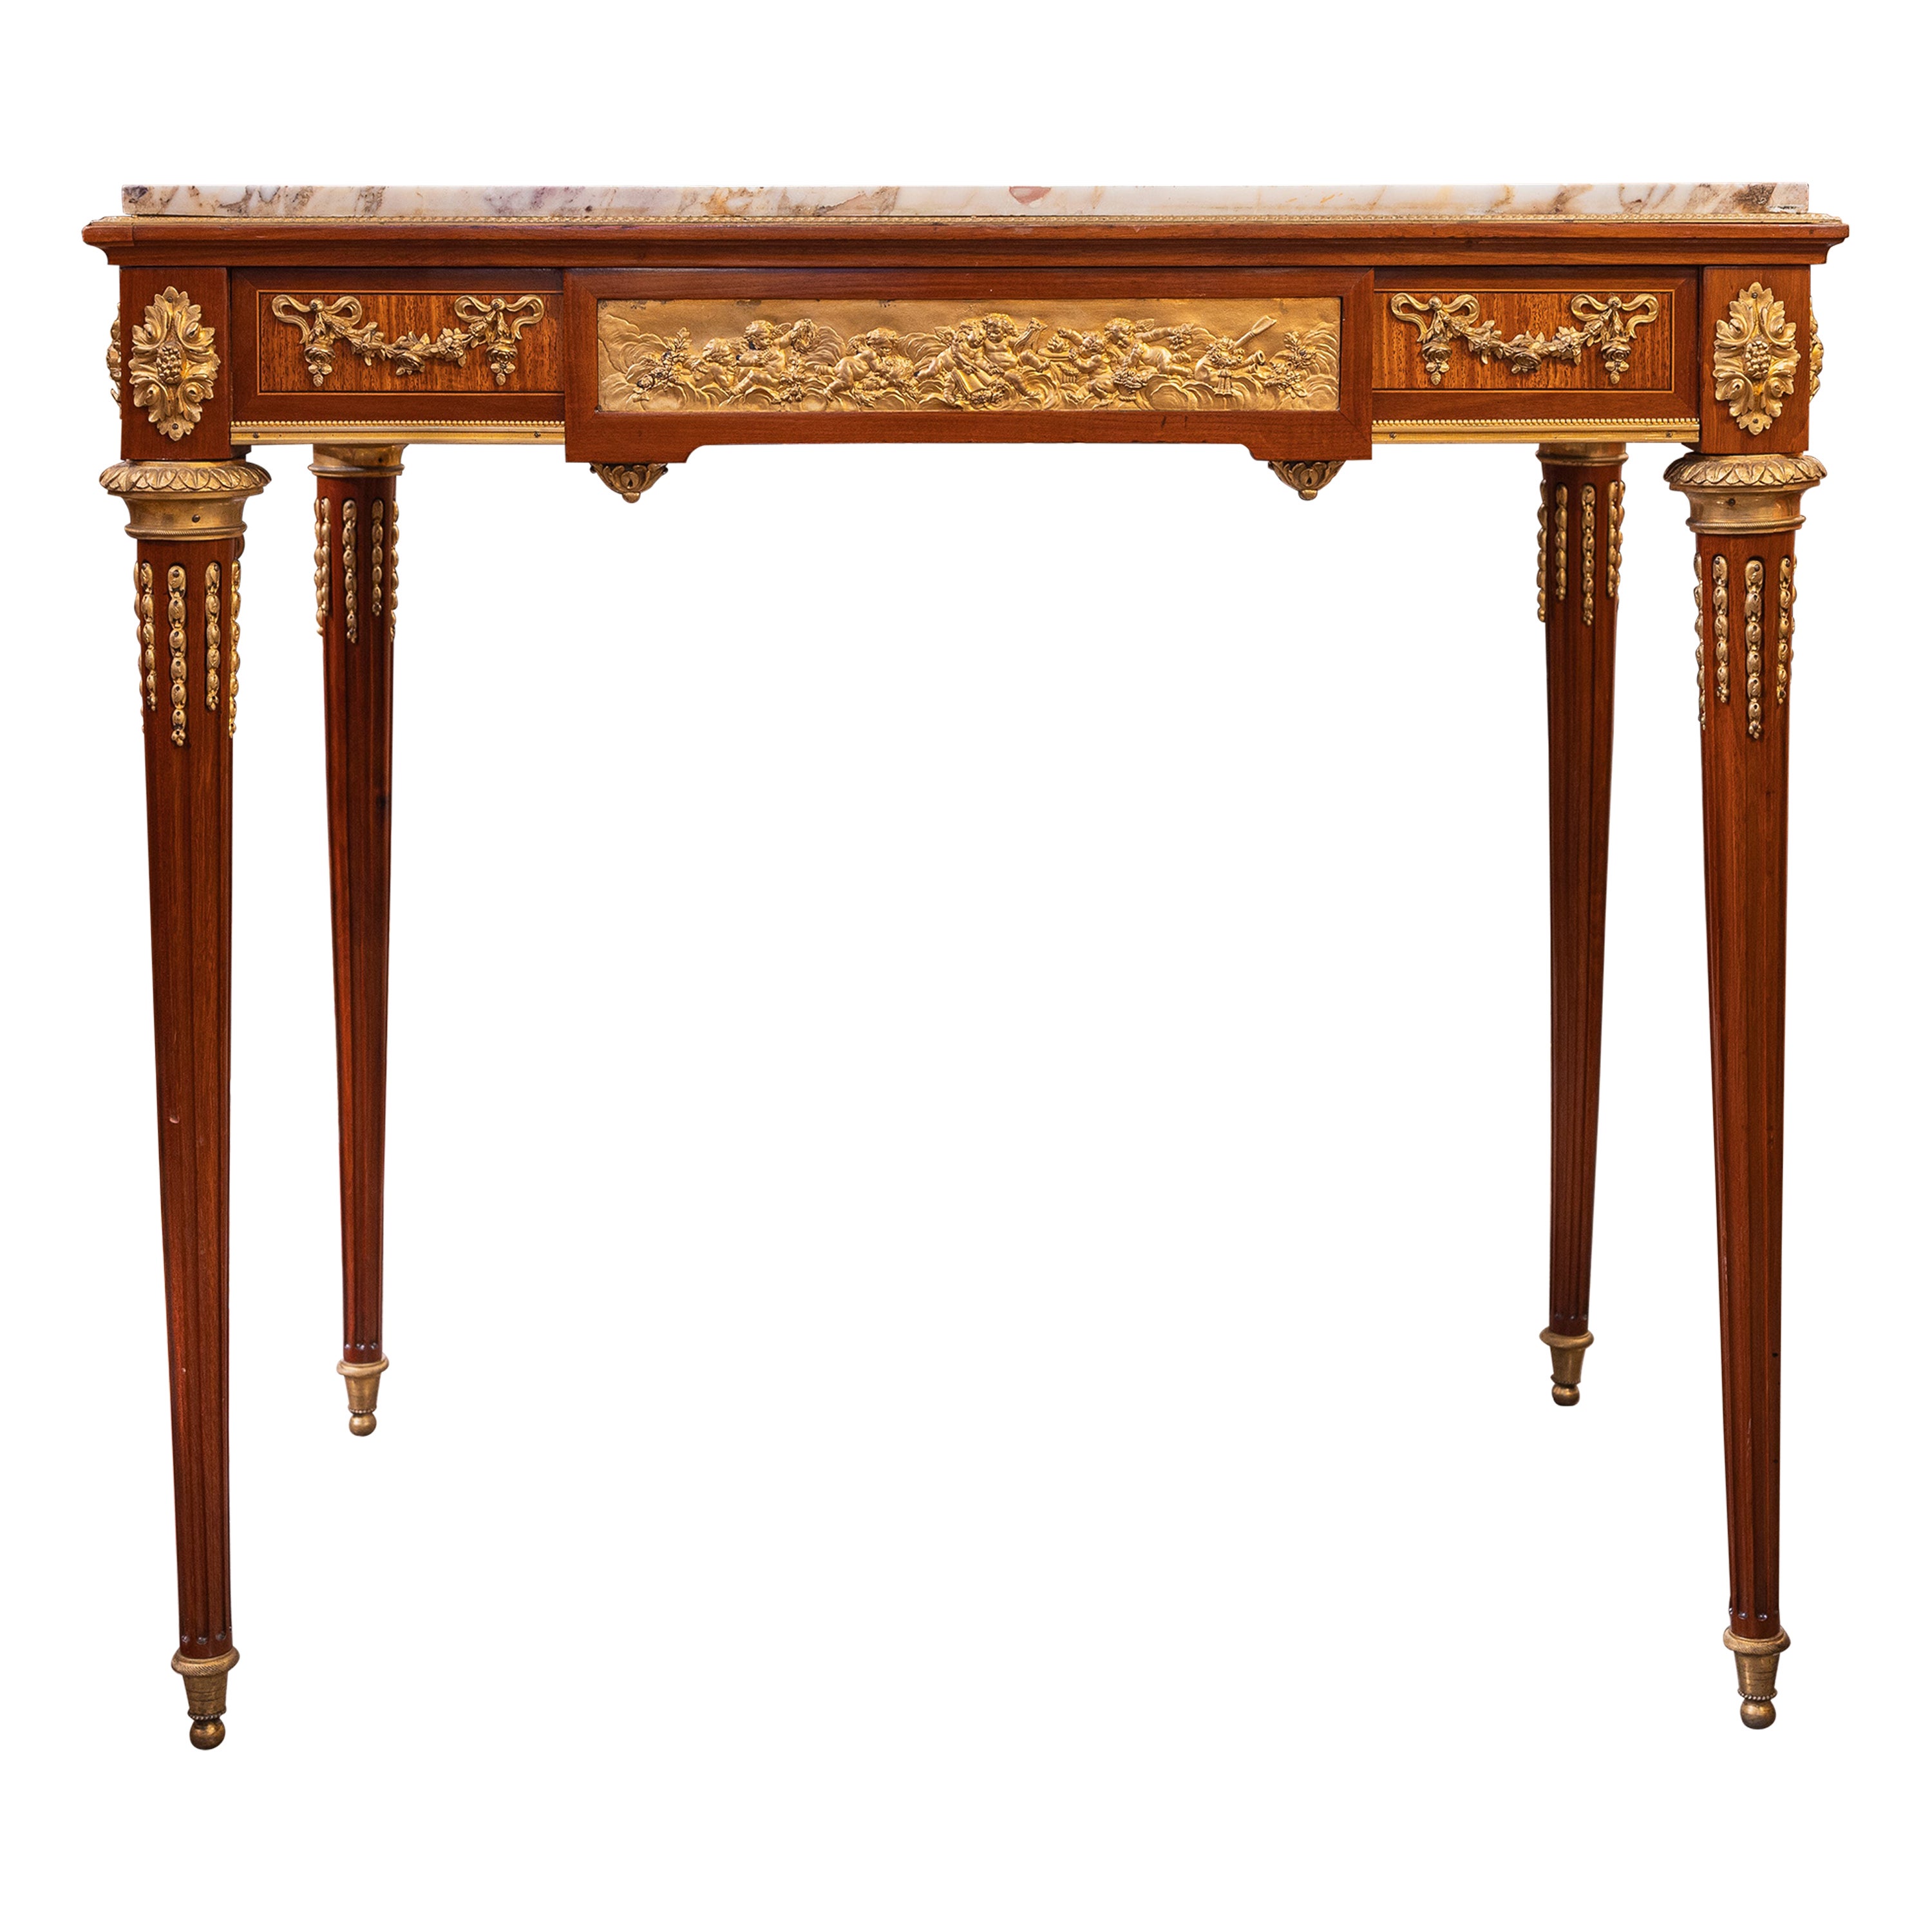 A very fine 19th c French Louis XVI signed marble top and gilt bronze table